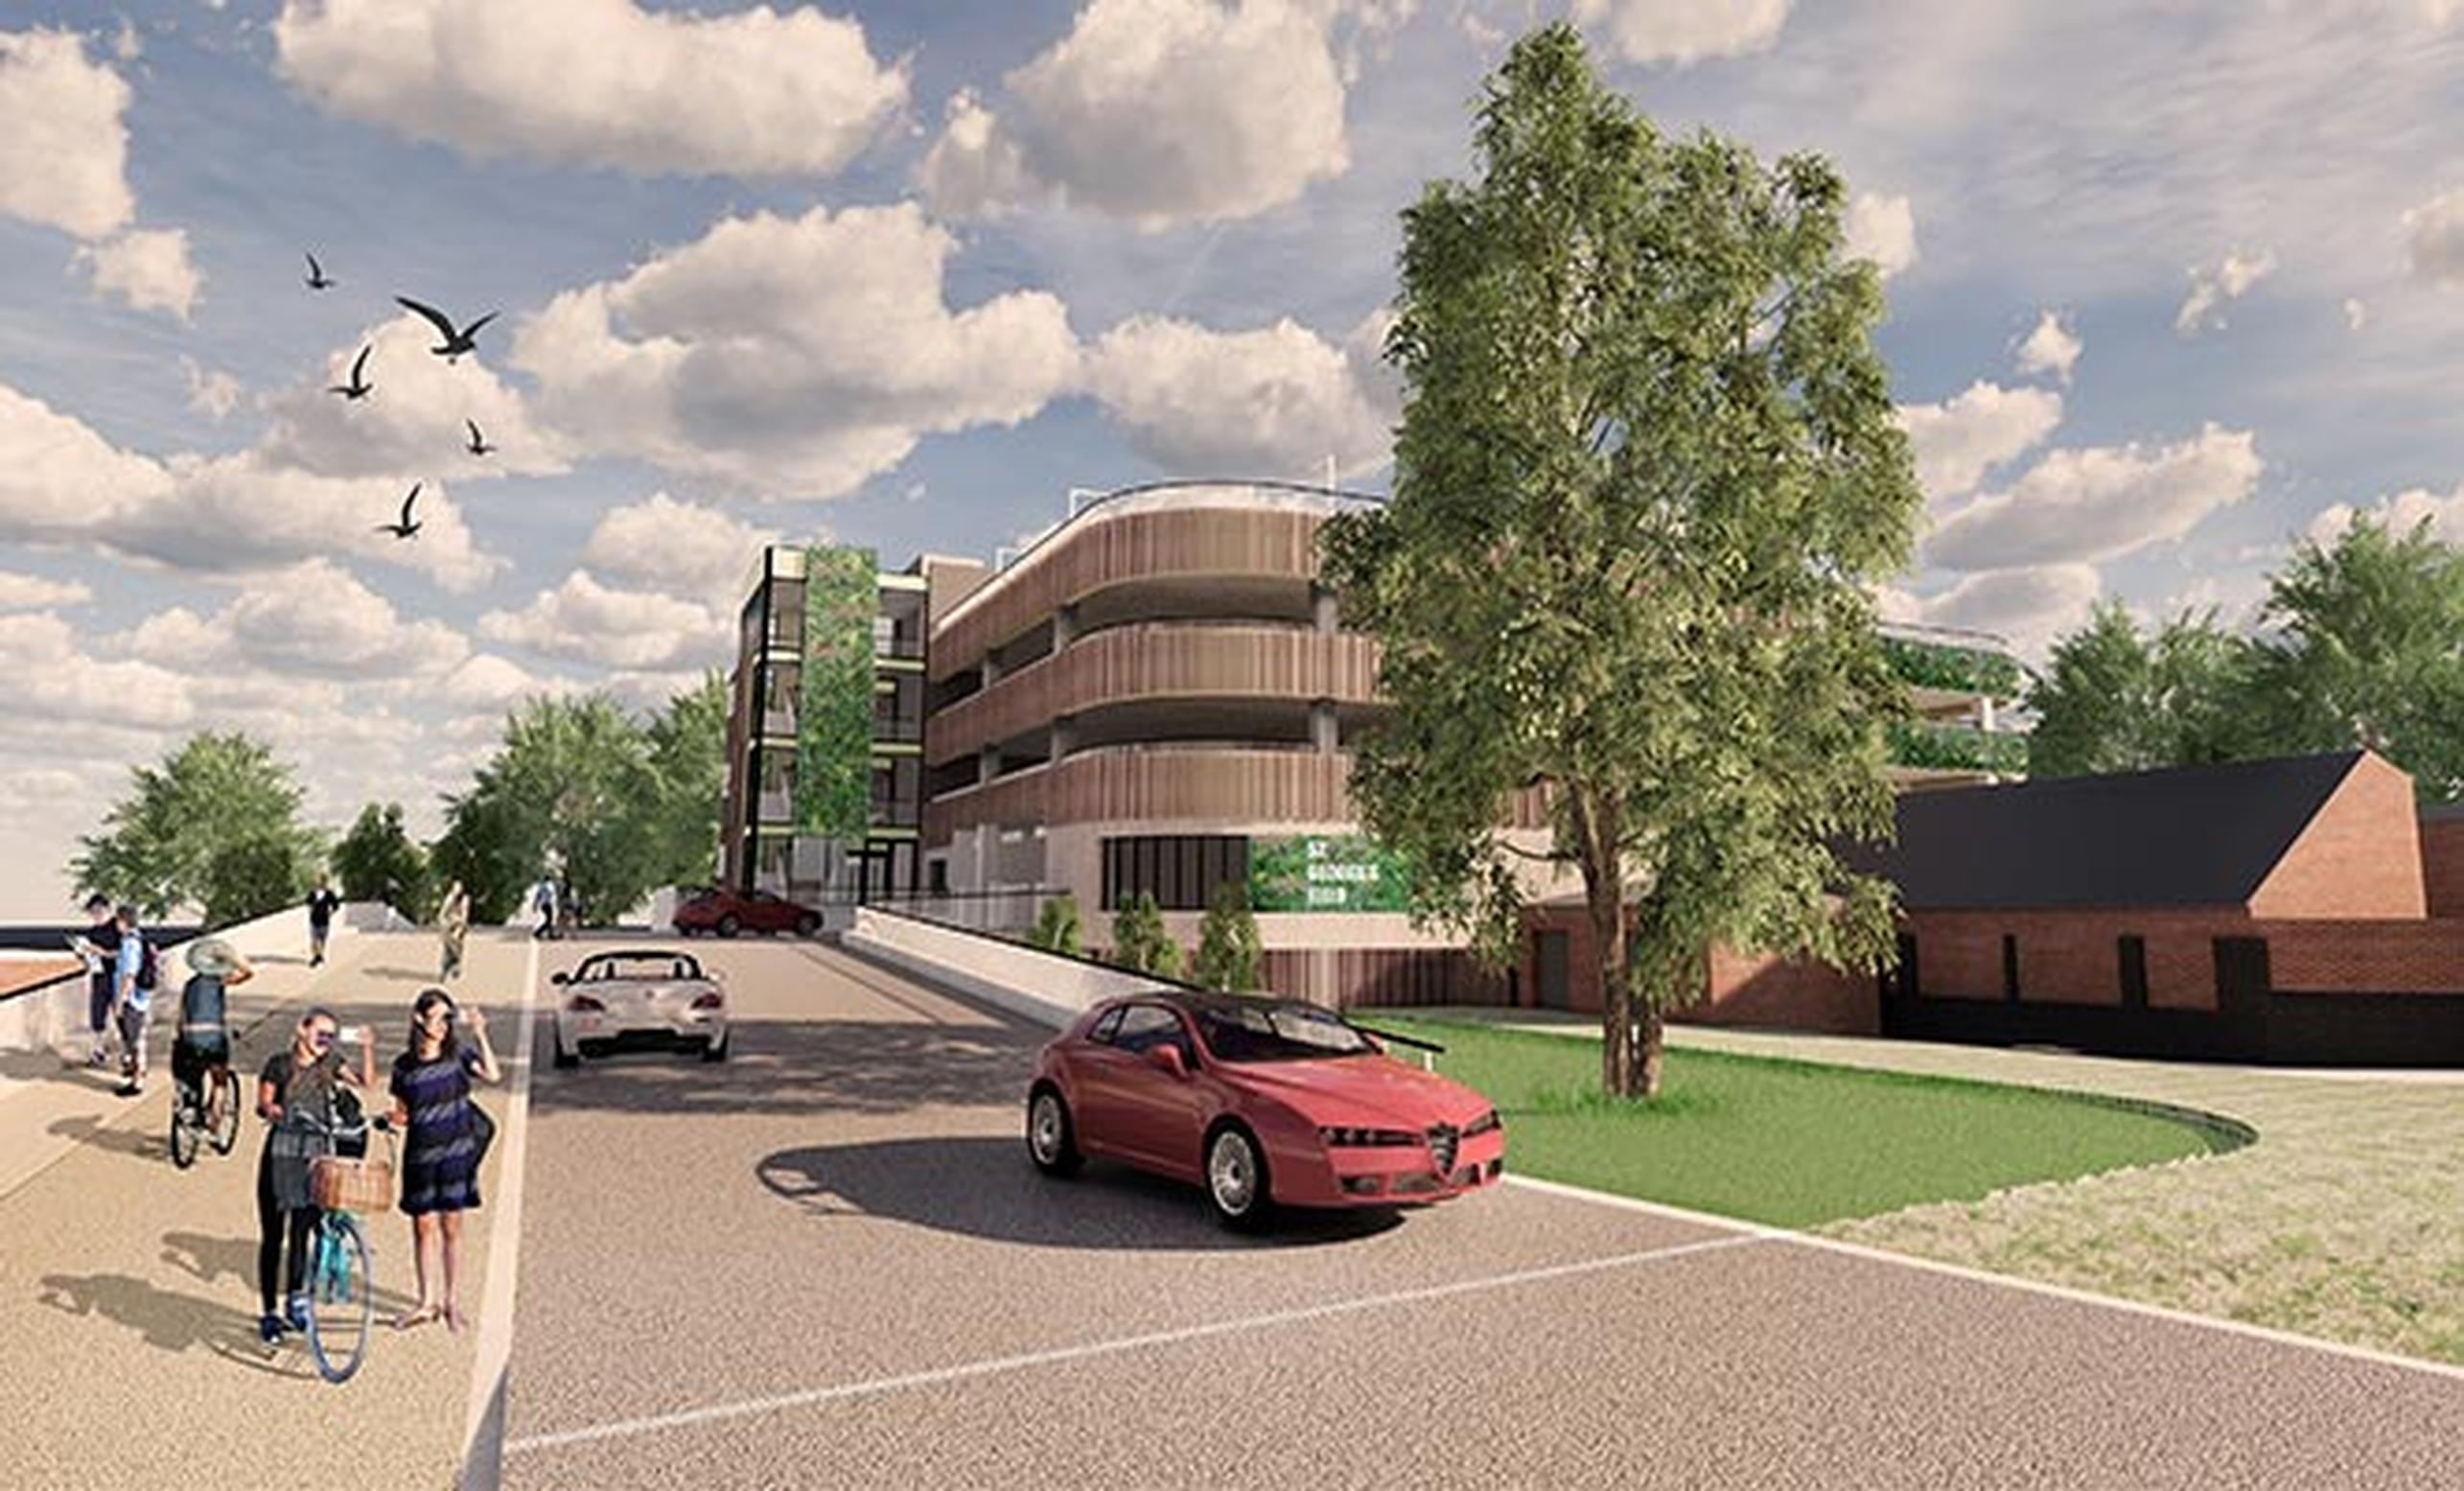 The proposed St George’s car park